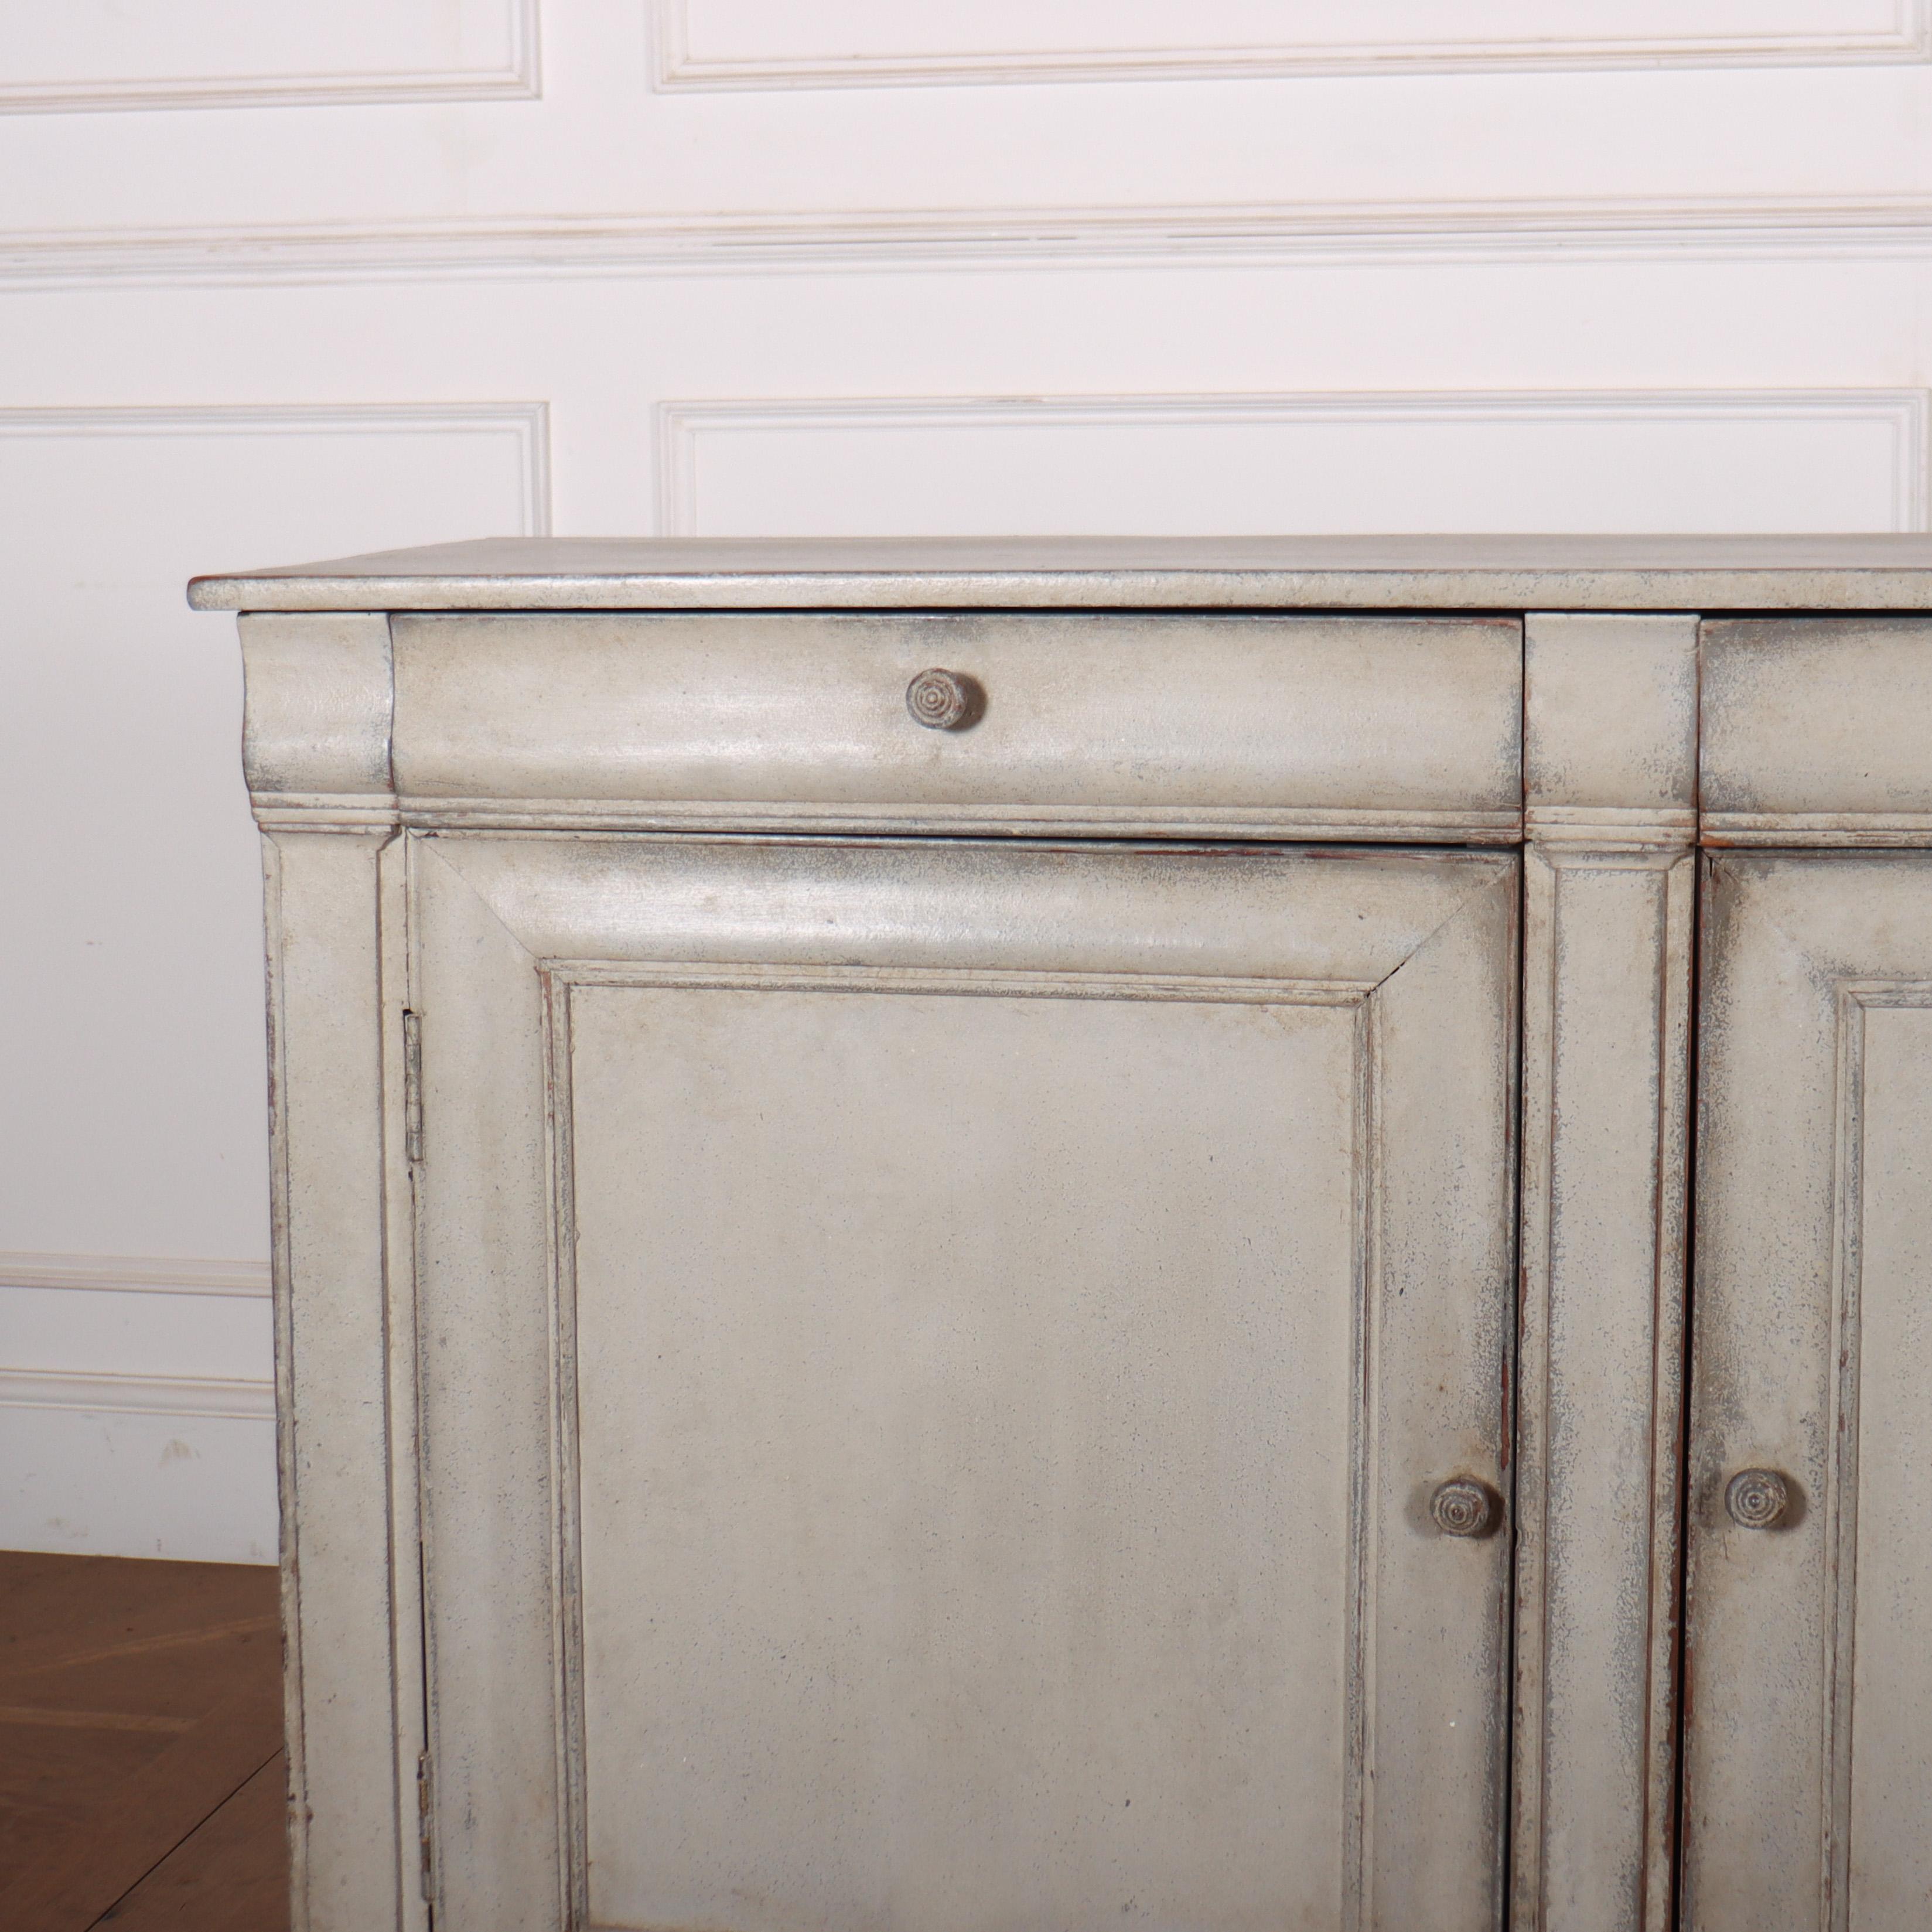 Early 19th C French painted narrow enfilade. 1830.

Reference: 8308

Dimensions
82.5 inches (210 cms) Wide
19.5 inches (50 cms) Deep
38 inches (97 cms) High